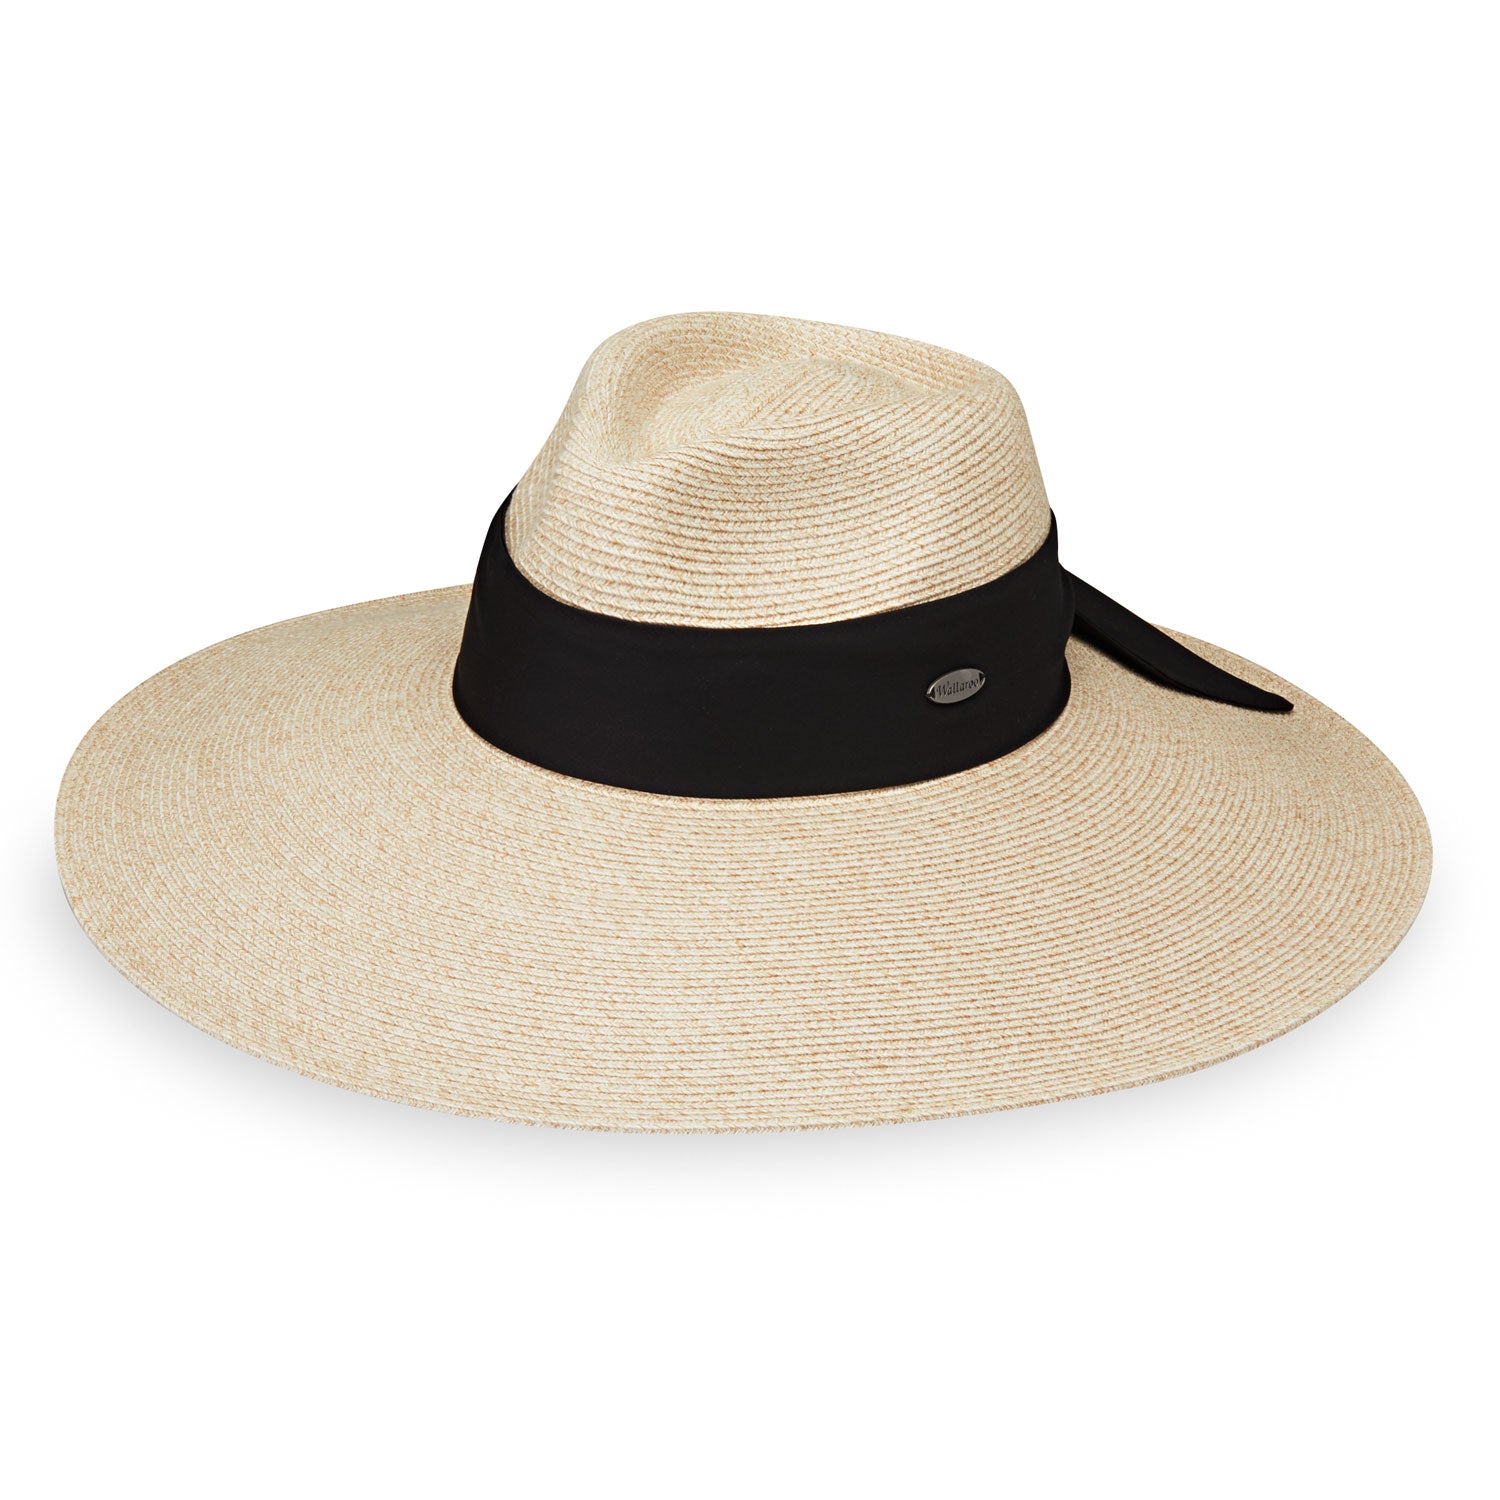 Featuring Front of Big Wide Brim Fedora Style Elise Summer Sun Hat in White Beige from Wallaroo